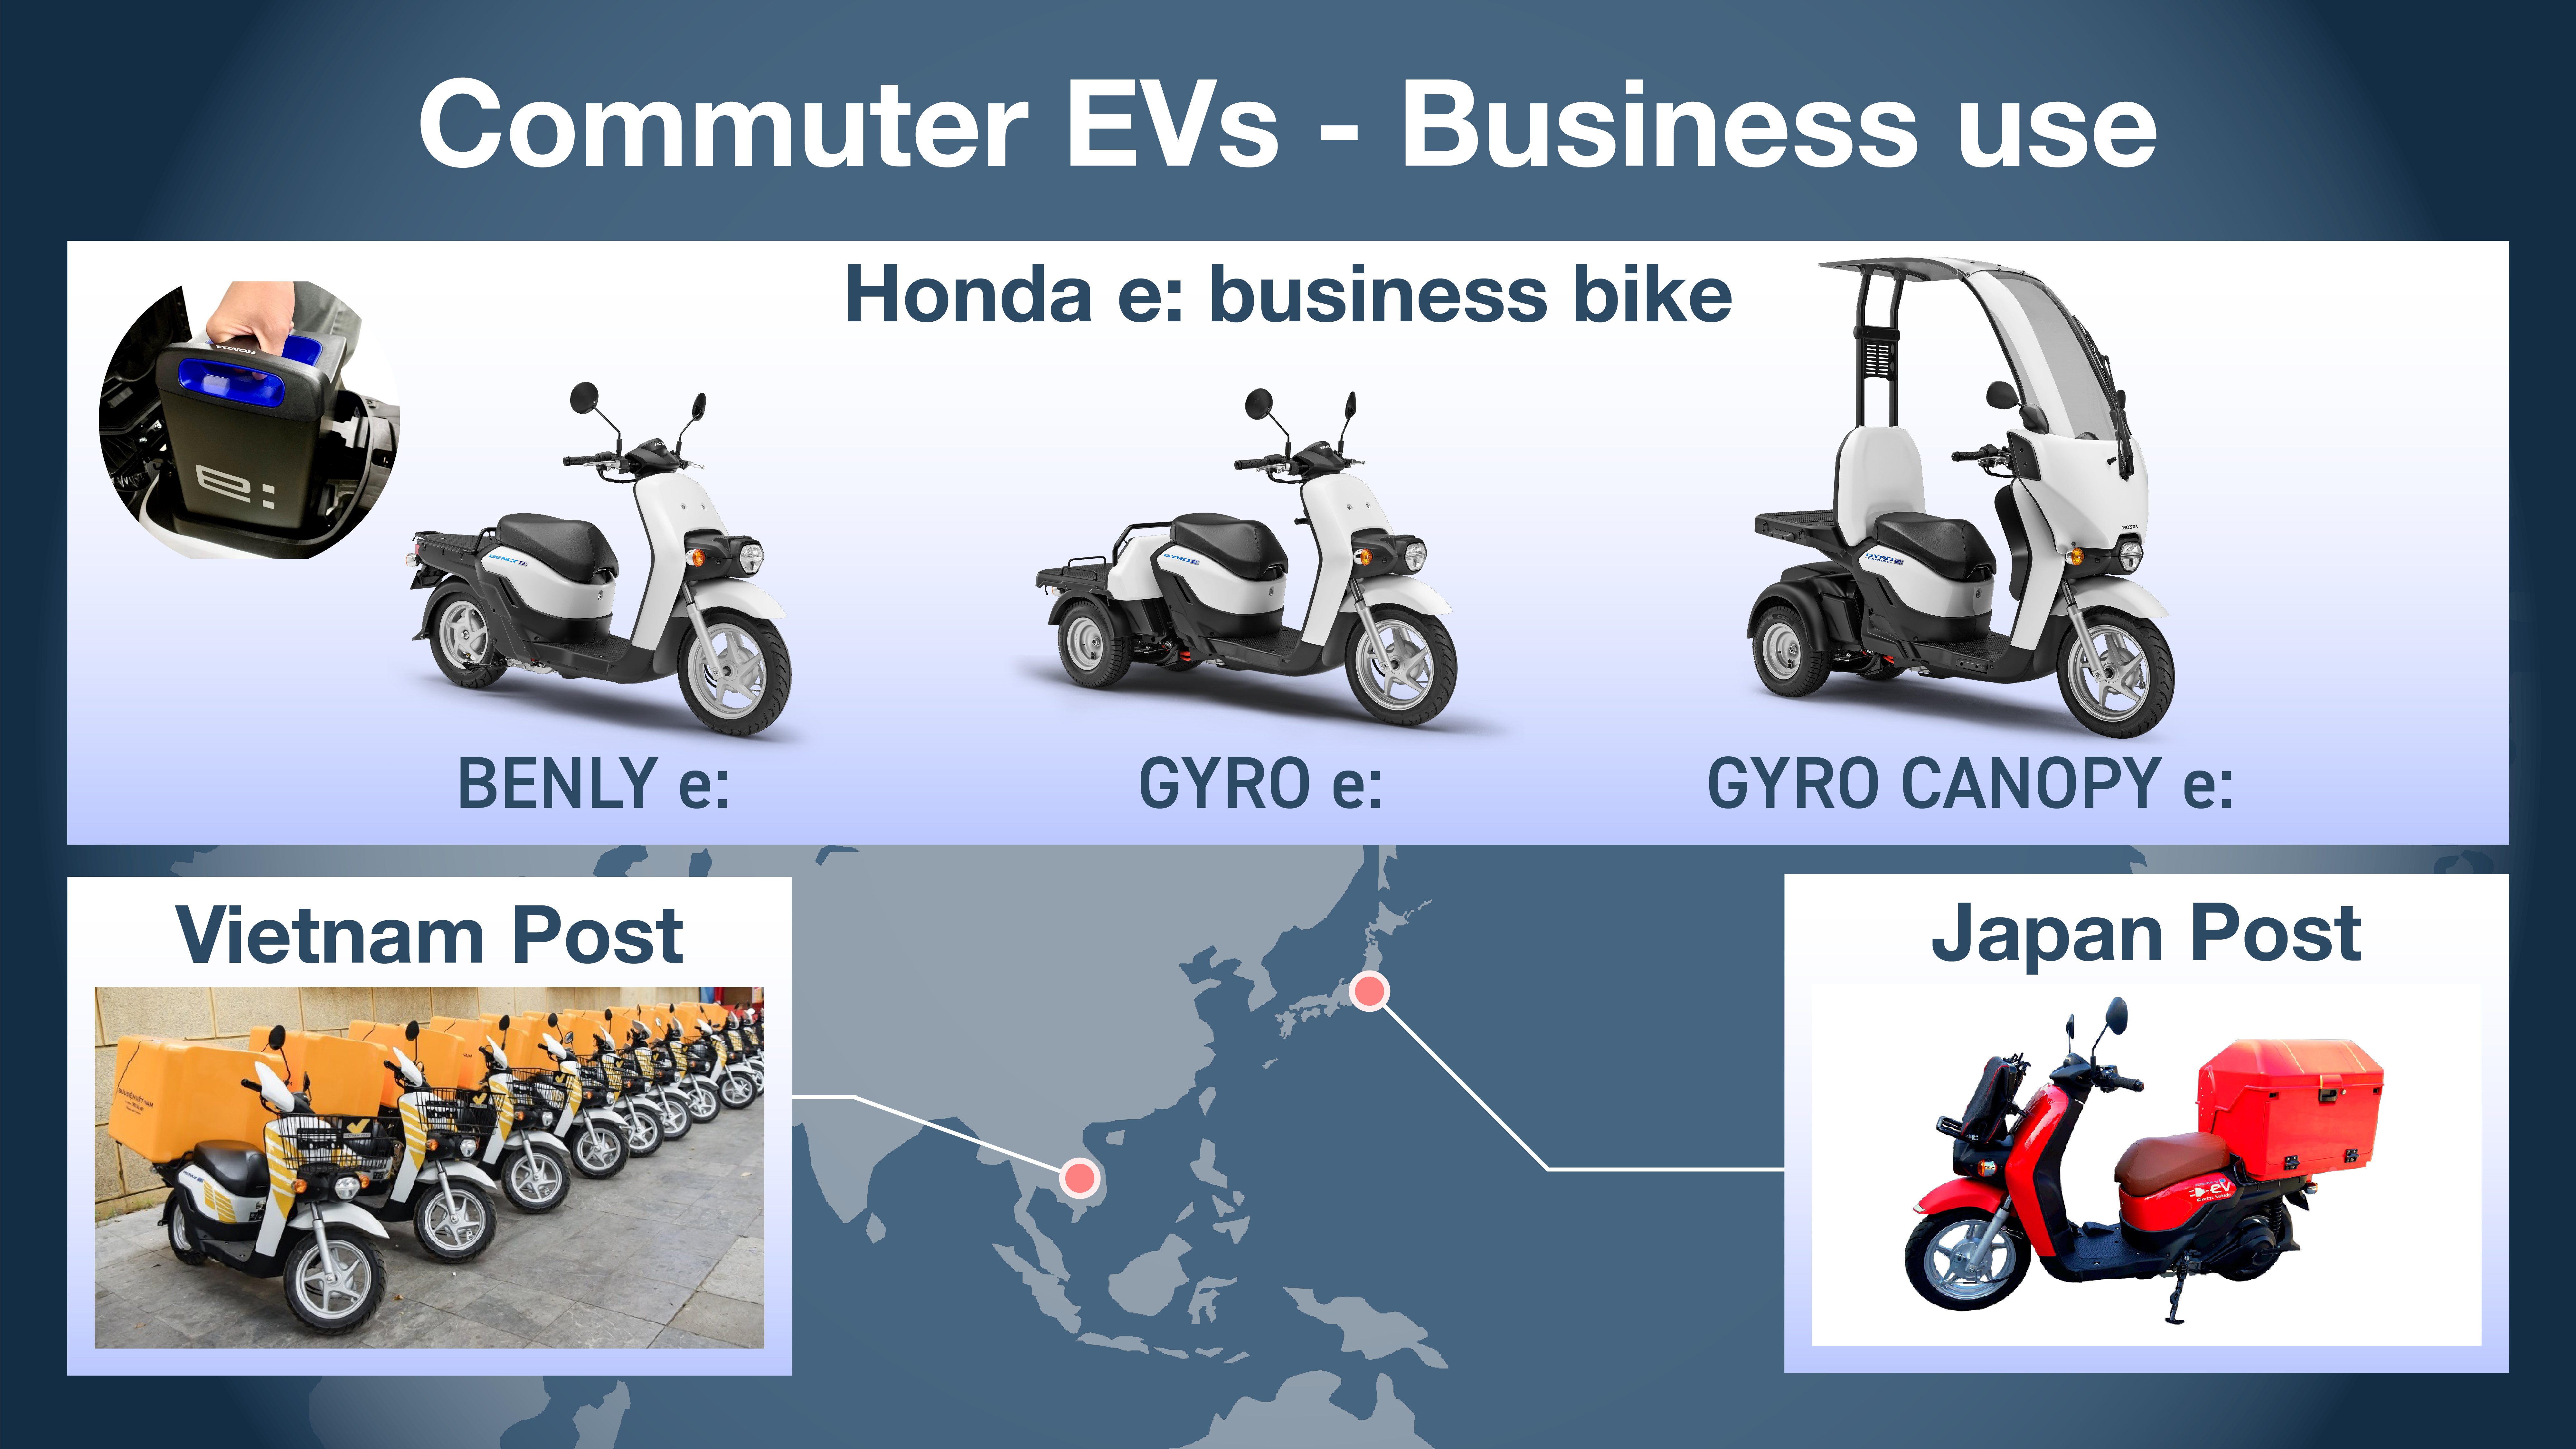 Commuter EVs - Business use